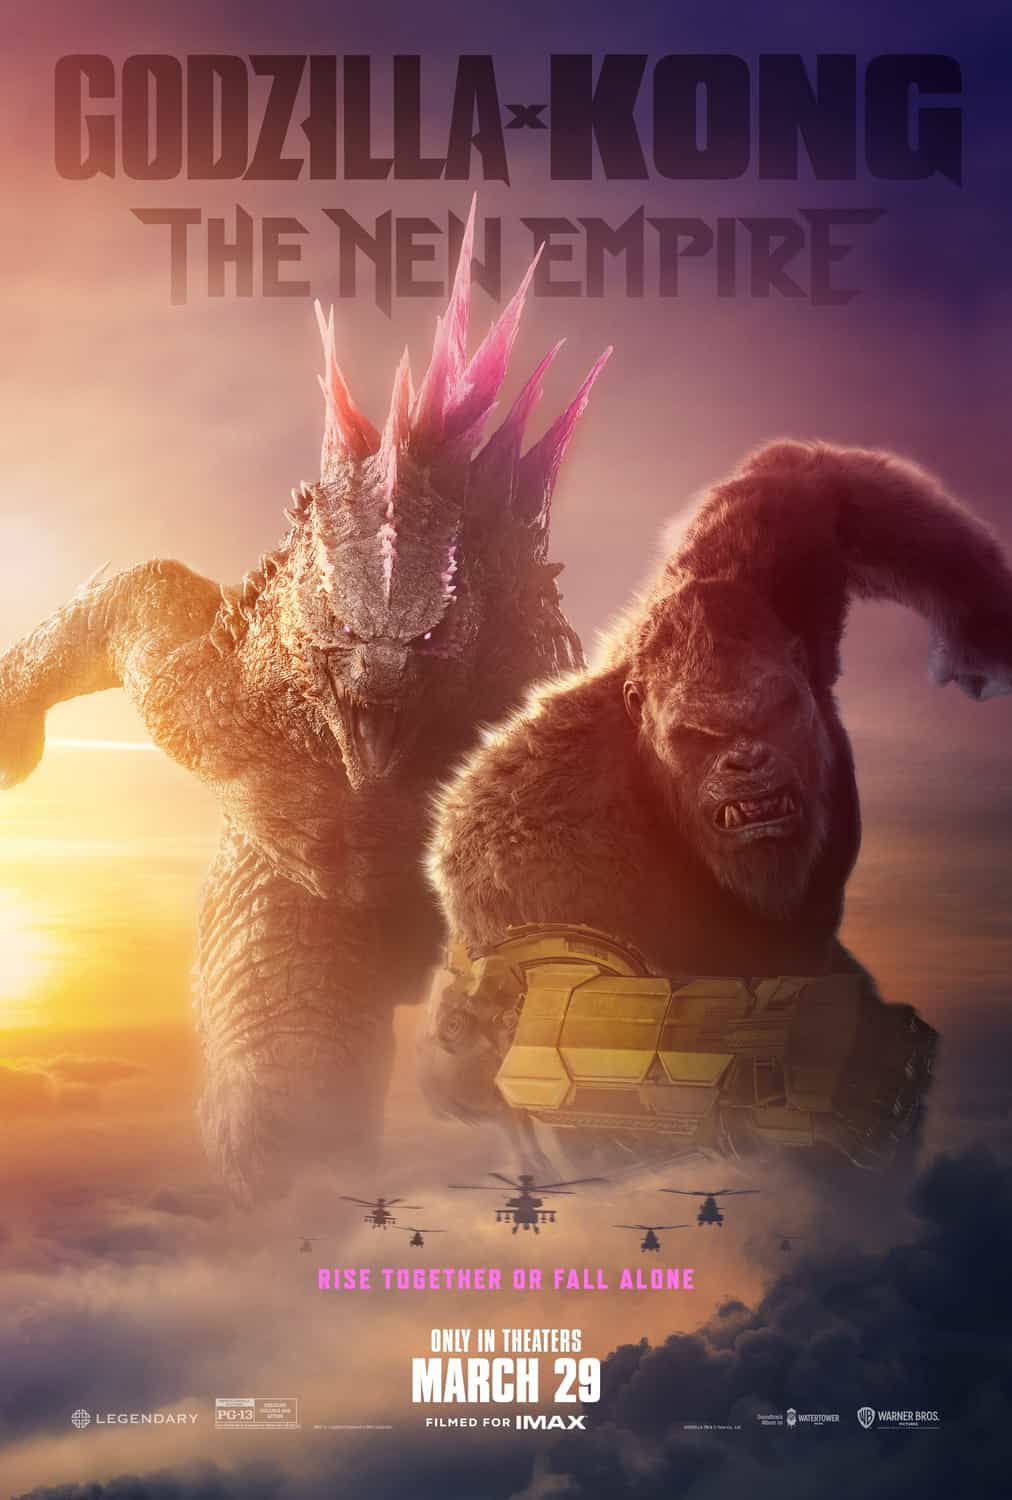 US Box Office Weekend Report 5th - 7th April 2024:  Godzilla X Kong: The New Empire spends a second weekend at the top of the US box office while Monkey Man makes its debut at 2